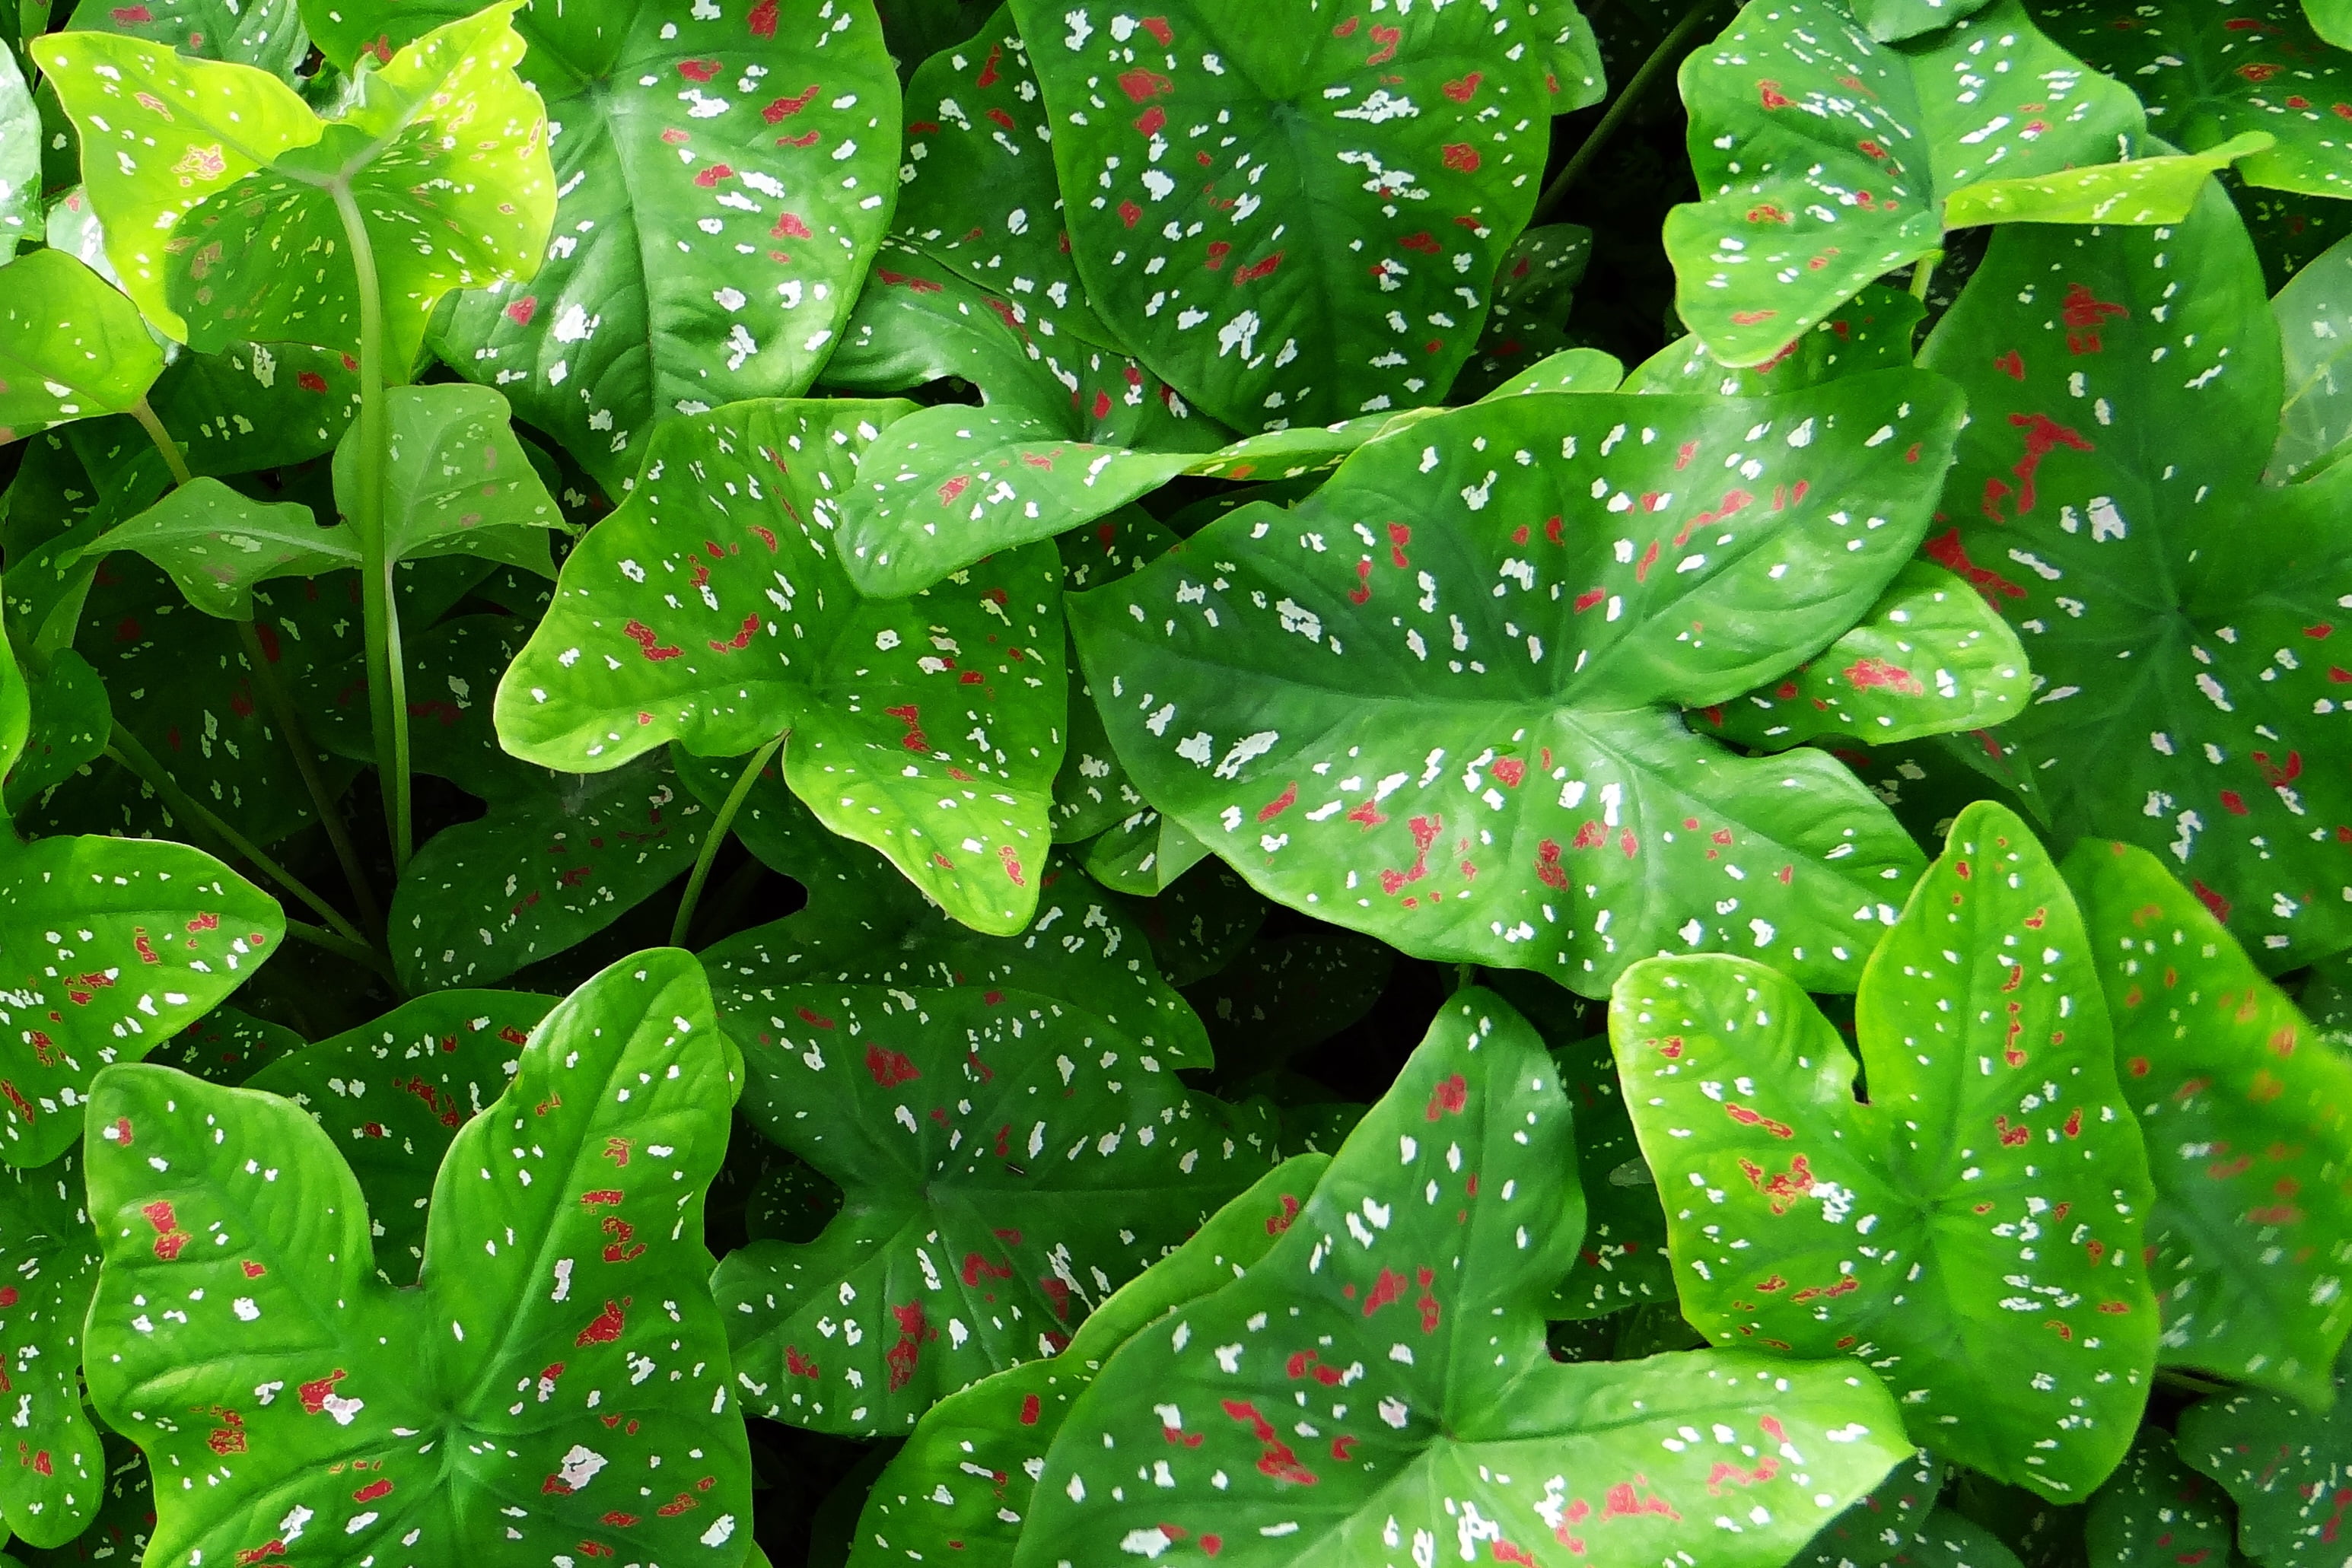 green leafed plants, caladium, leaves, nature, backgrounds, green Color